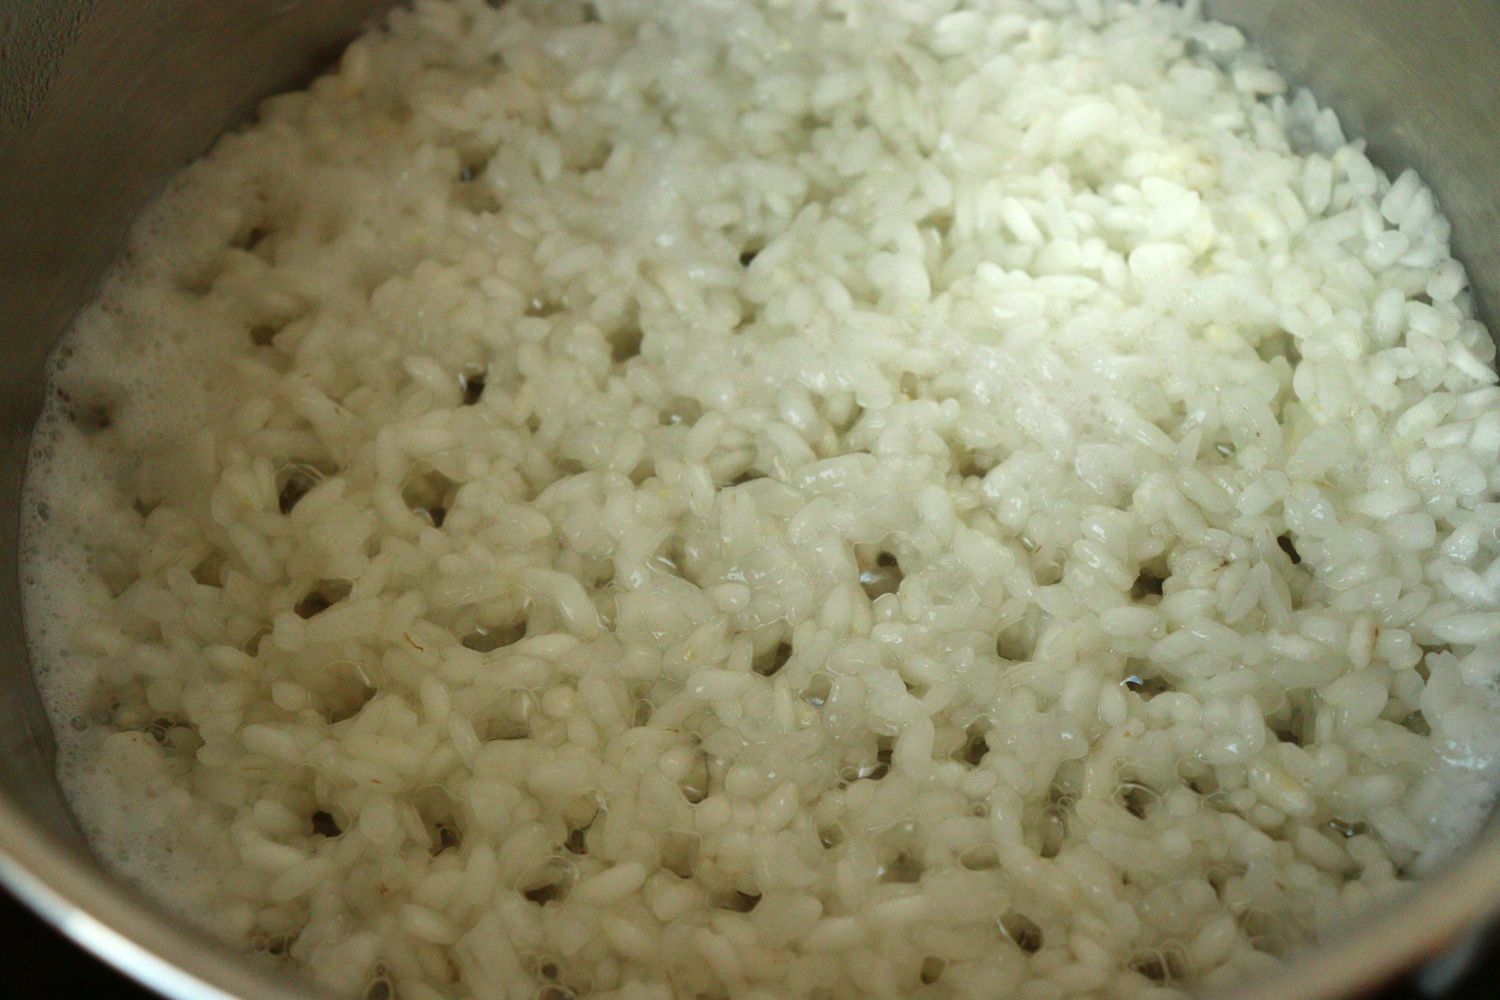 Nina's Recipes: Milchreis (Milk Rice) - German Rice Pudding - Boil the rice until the water is almost gone